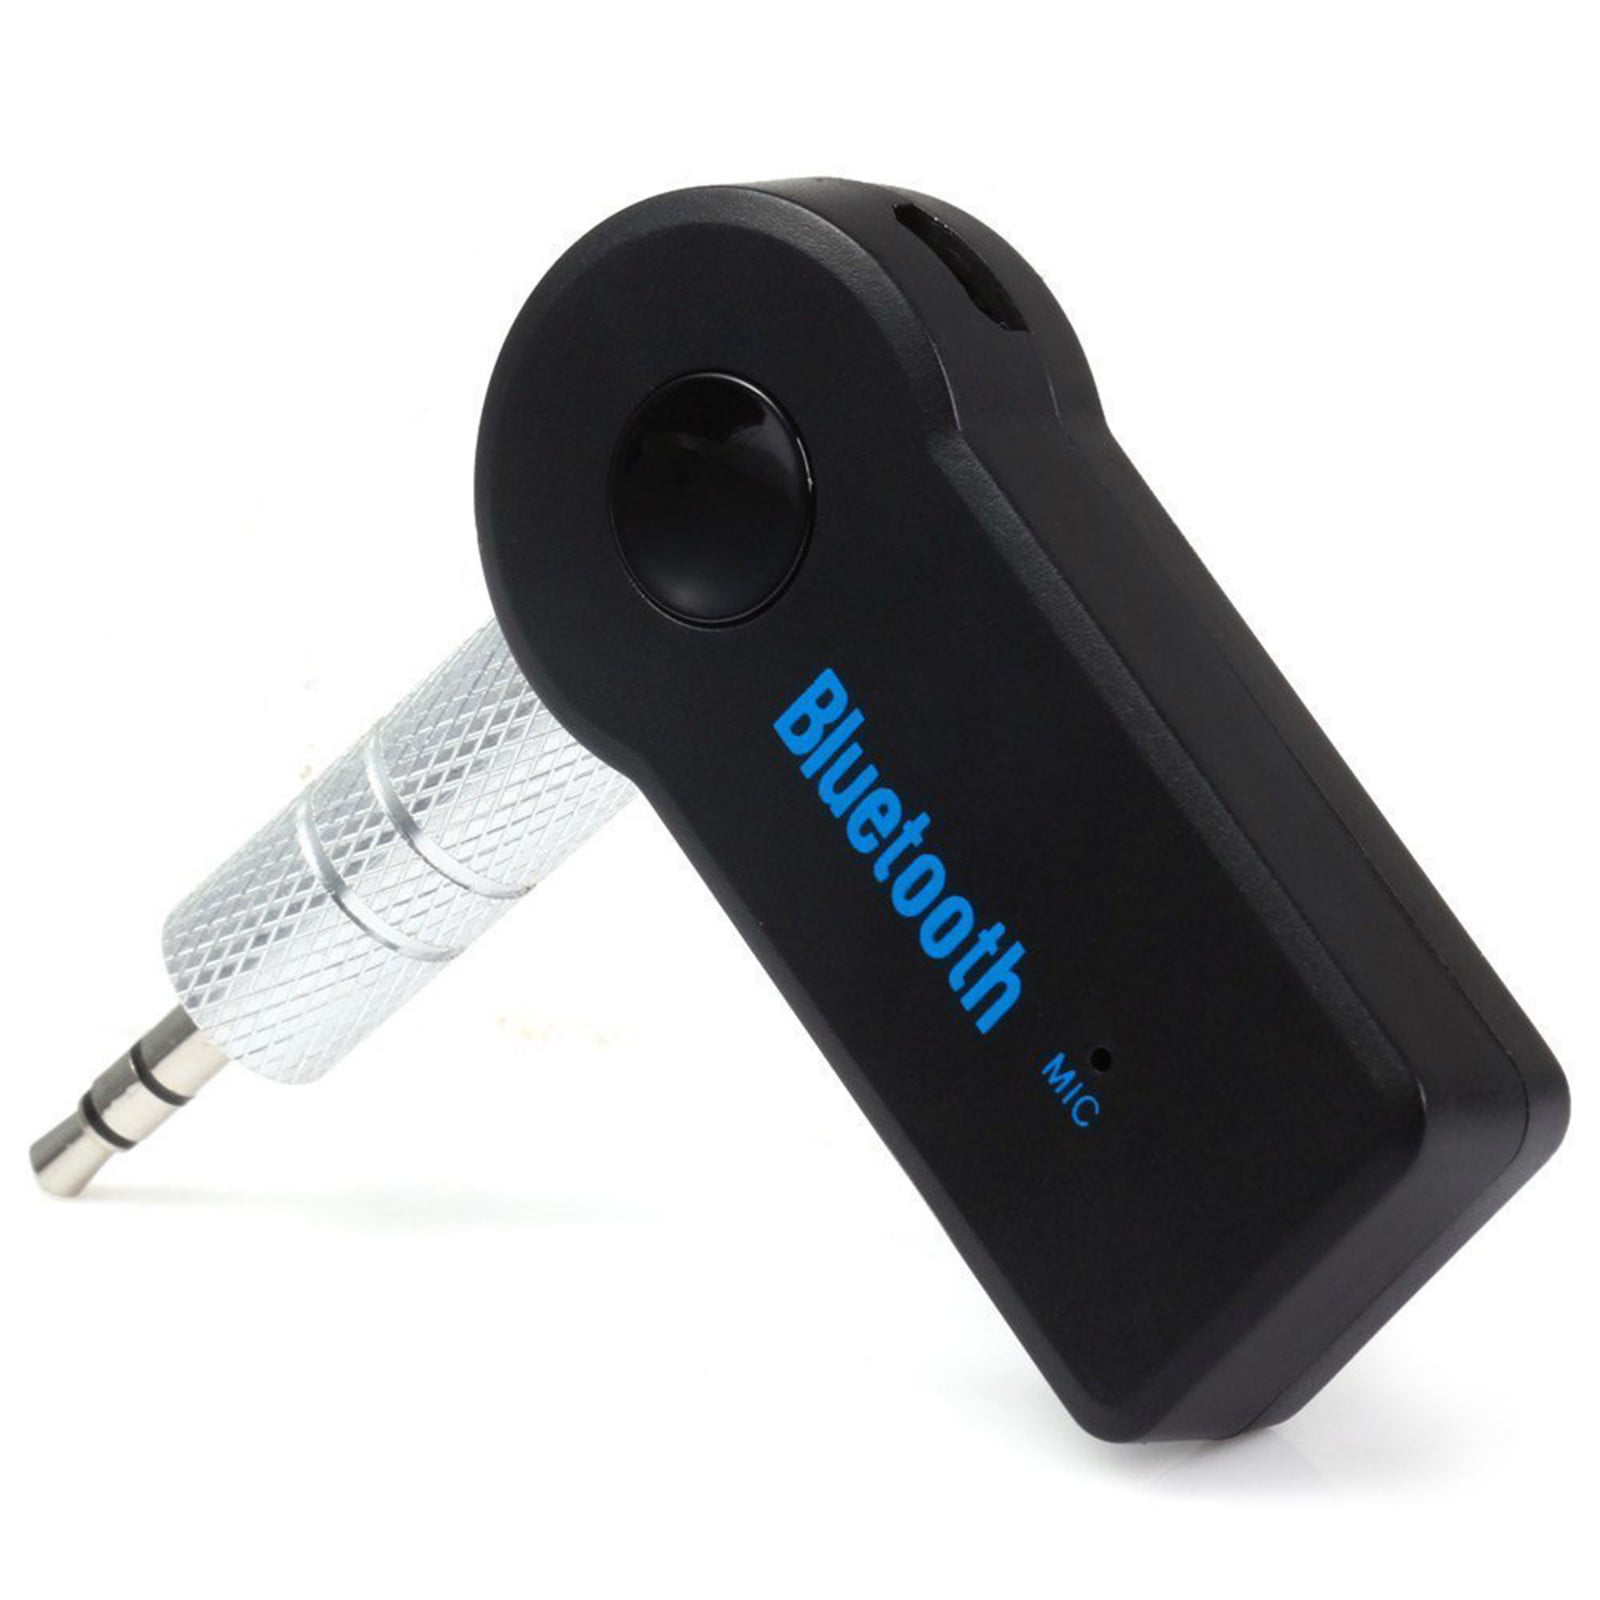 Bluetooth Receiver Wireless Bluetooth 5.0 Receiver Car Bluetooth Adapter Accessory,Hands-Free Car Kit 3.5mm Built-in Microphone Double Connection for Home Audio/Headphone/Car etc-Black